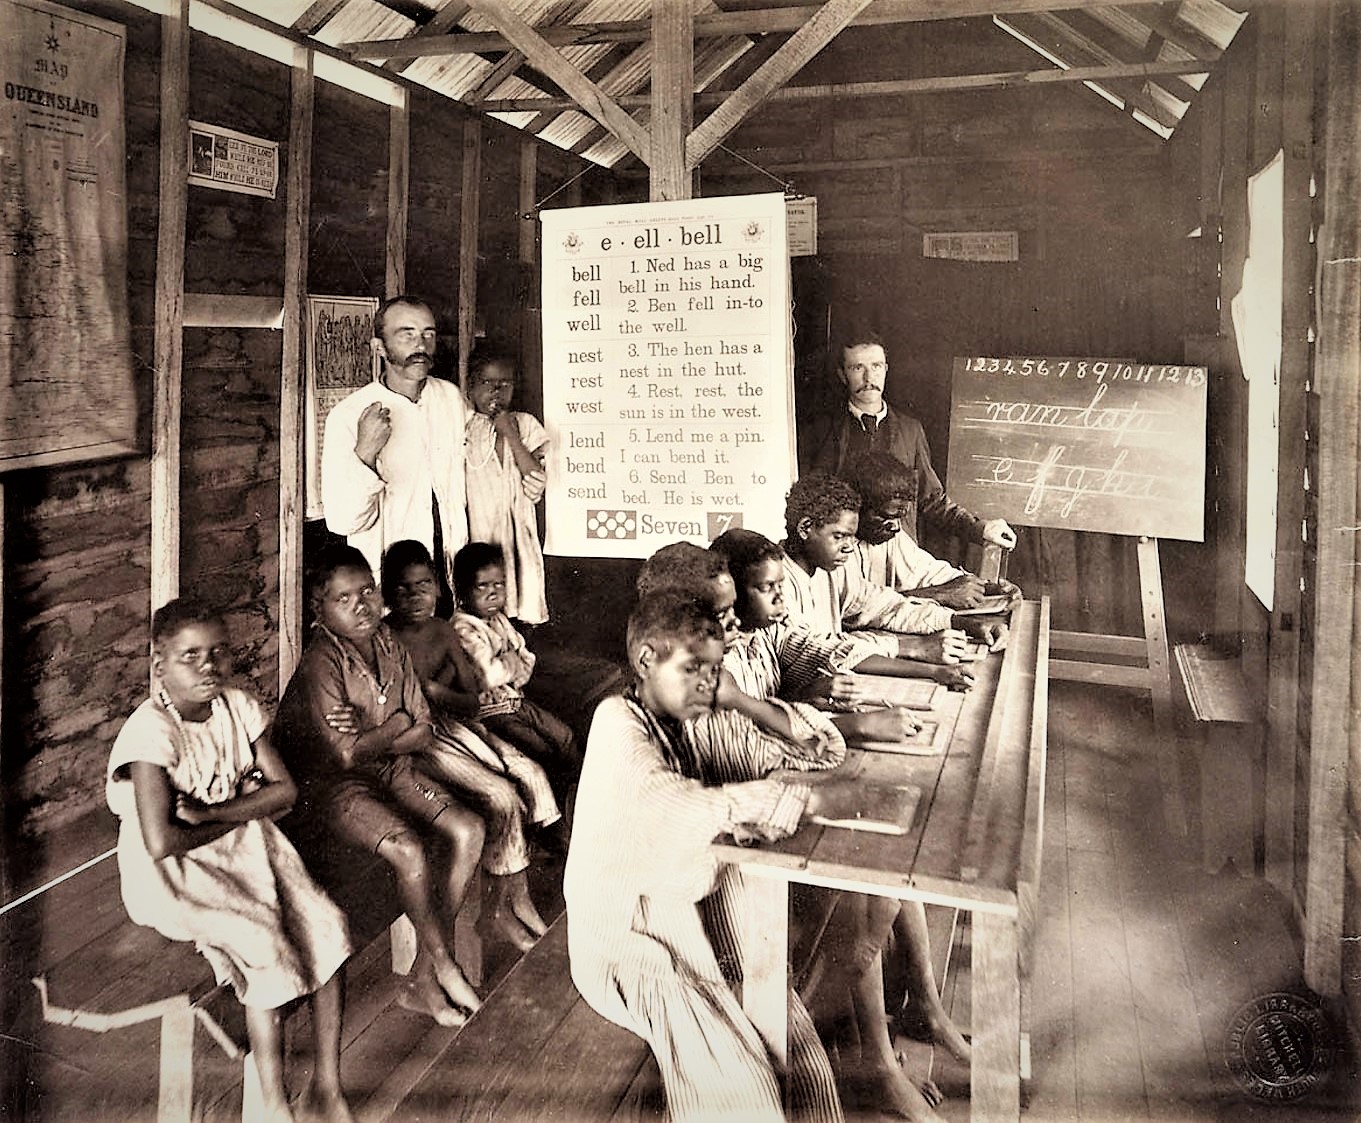 Inside the Yarrabah school room some years earlier than Yashchenko's visit (1893). Source: State Library of Queensland.